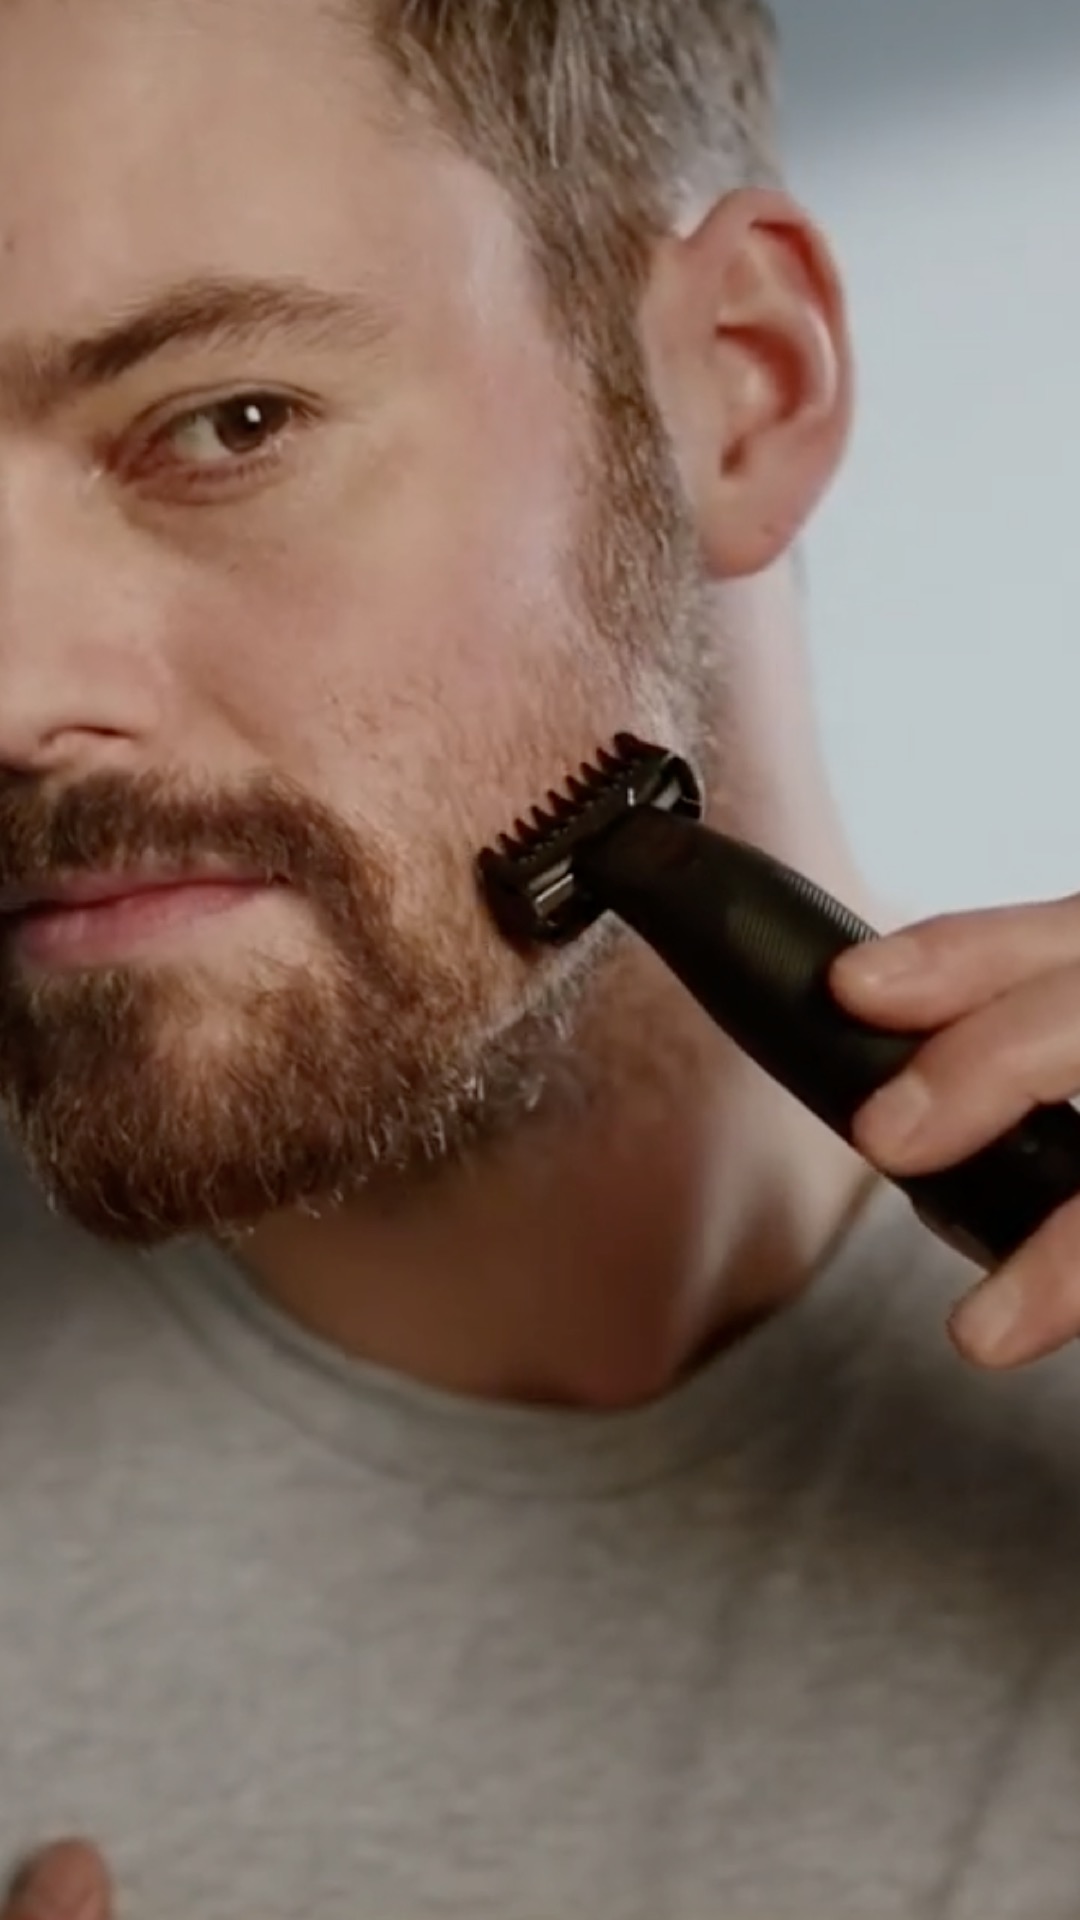 Series X all-in-one body groomers & trimmers for men